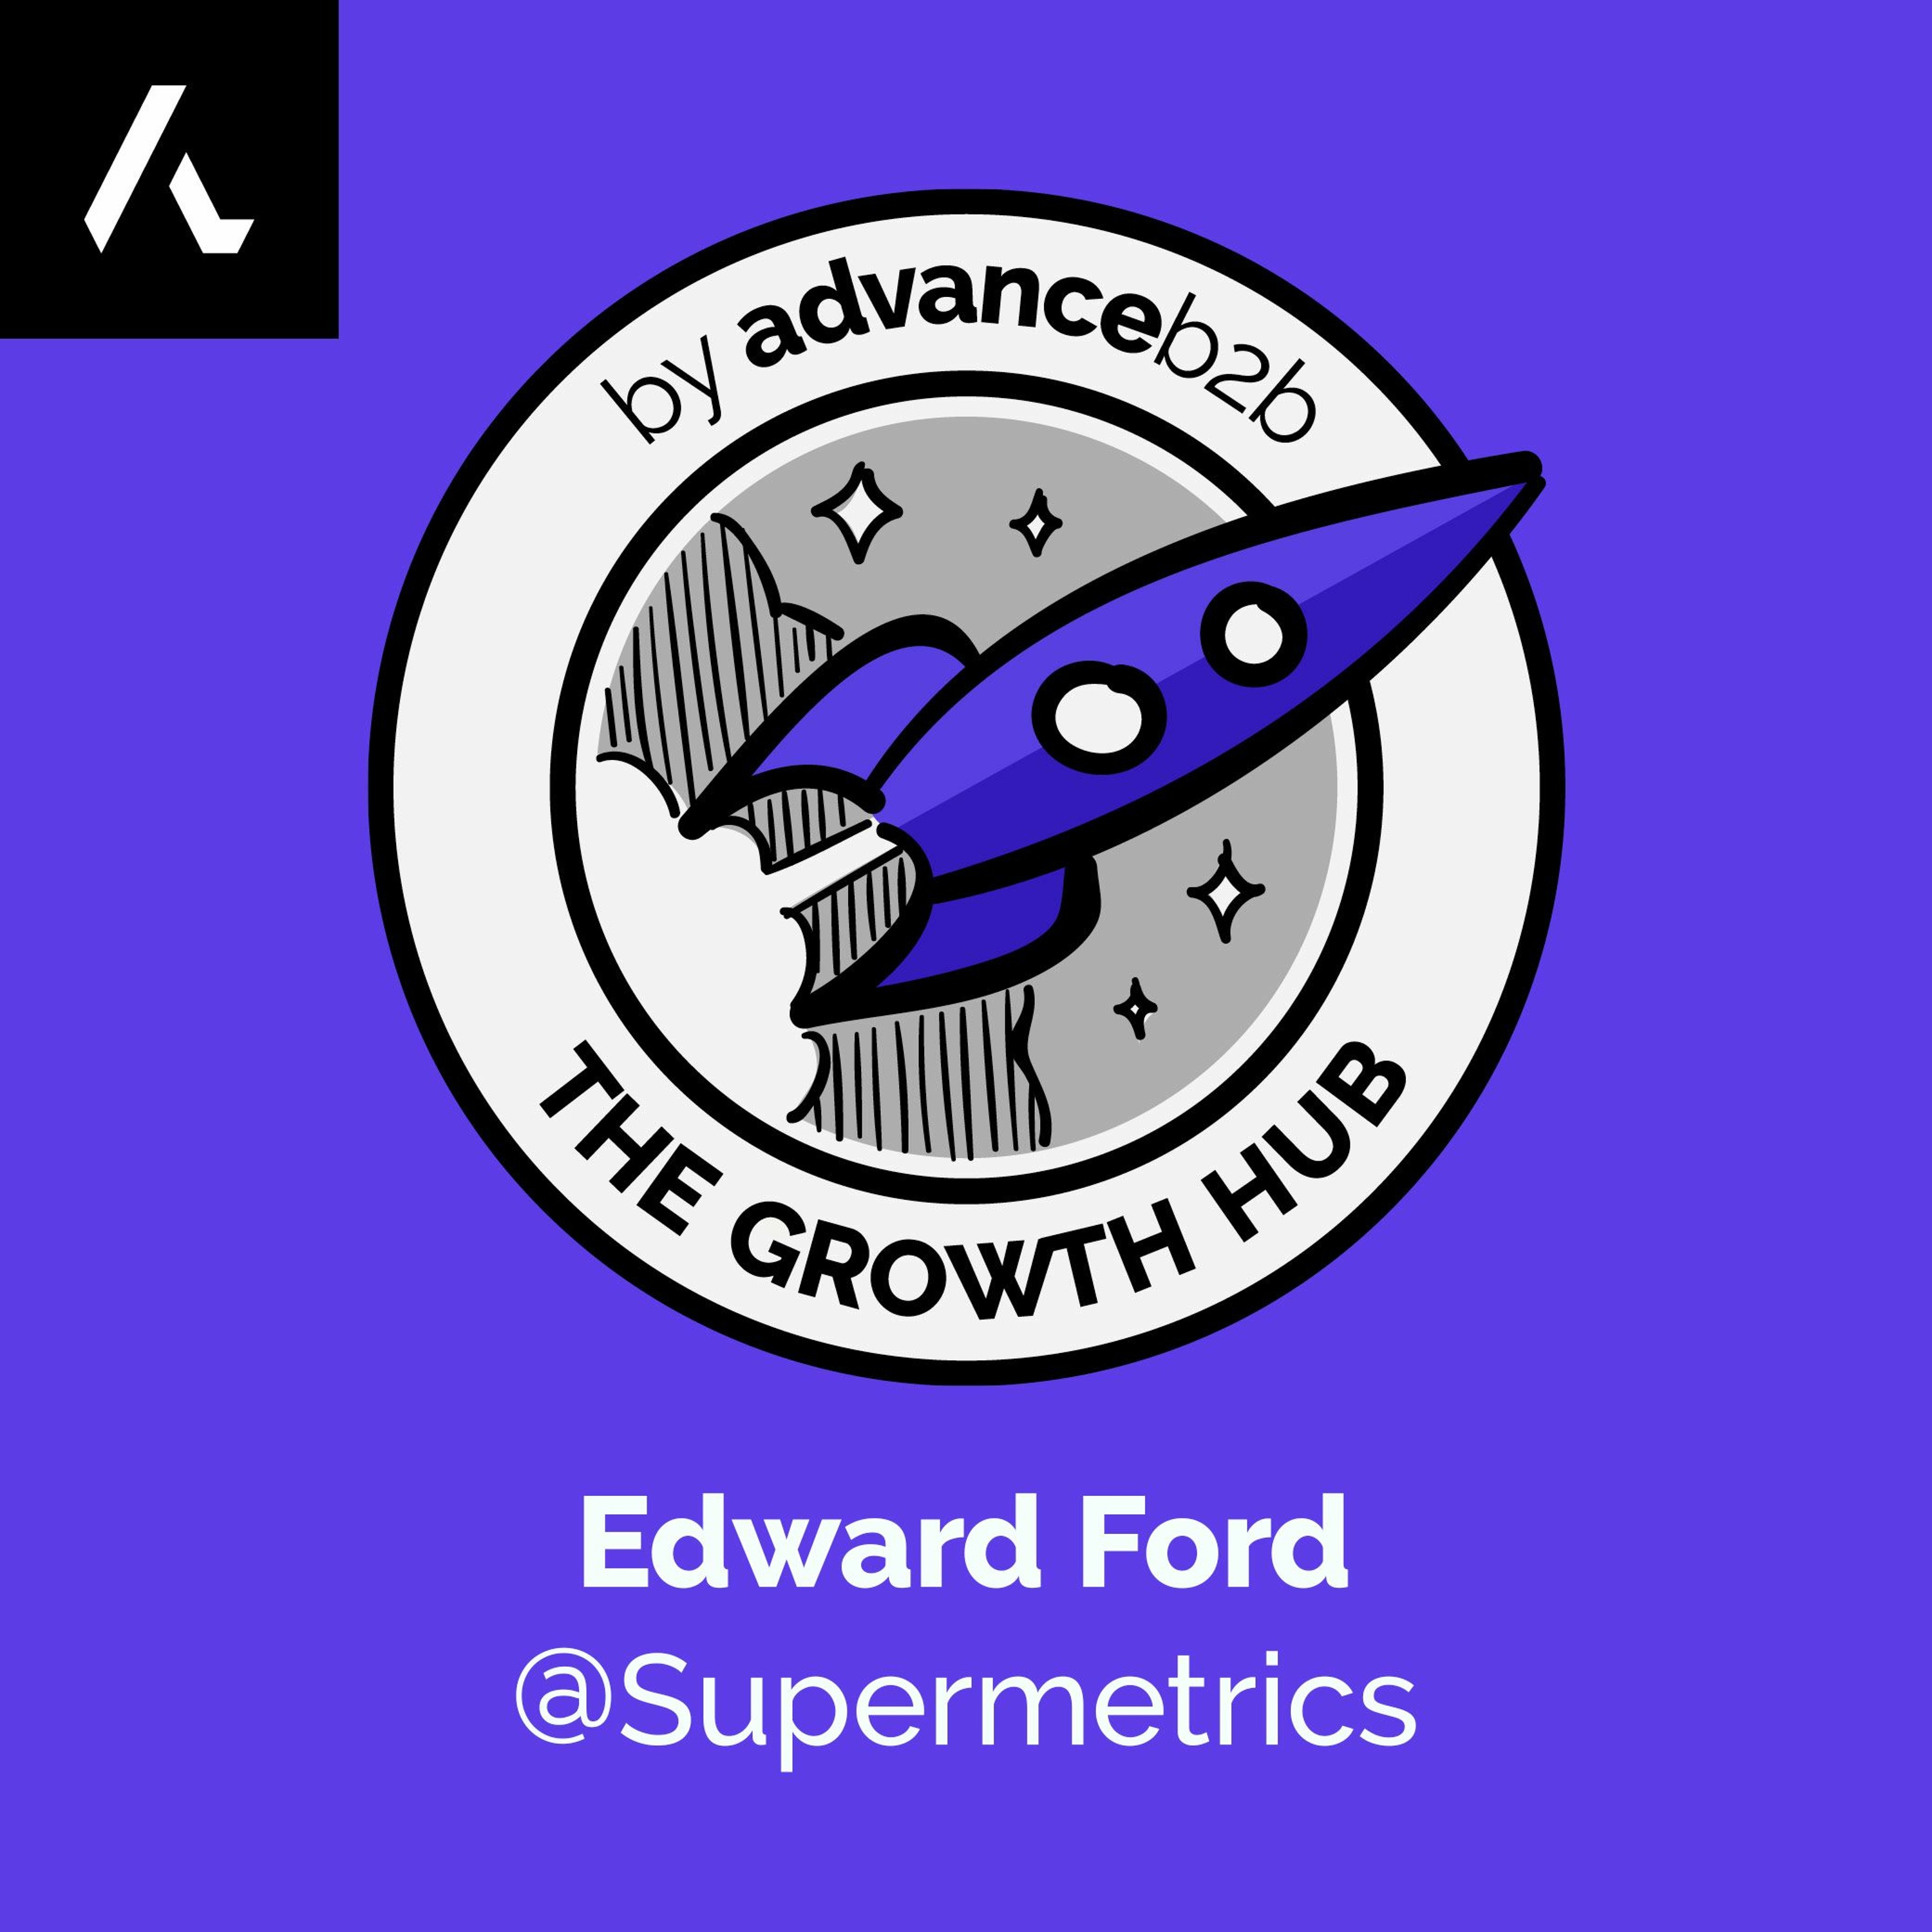 Behind the Scenes of a 50M ARR Company, with Edward Ford, Demand Gen Director @Supermetrics